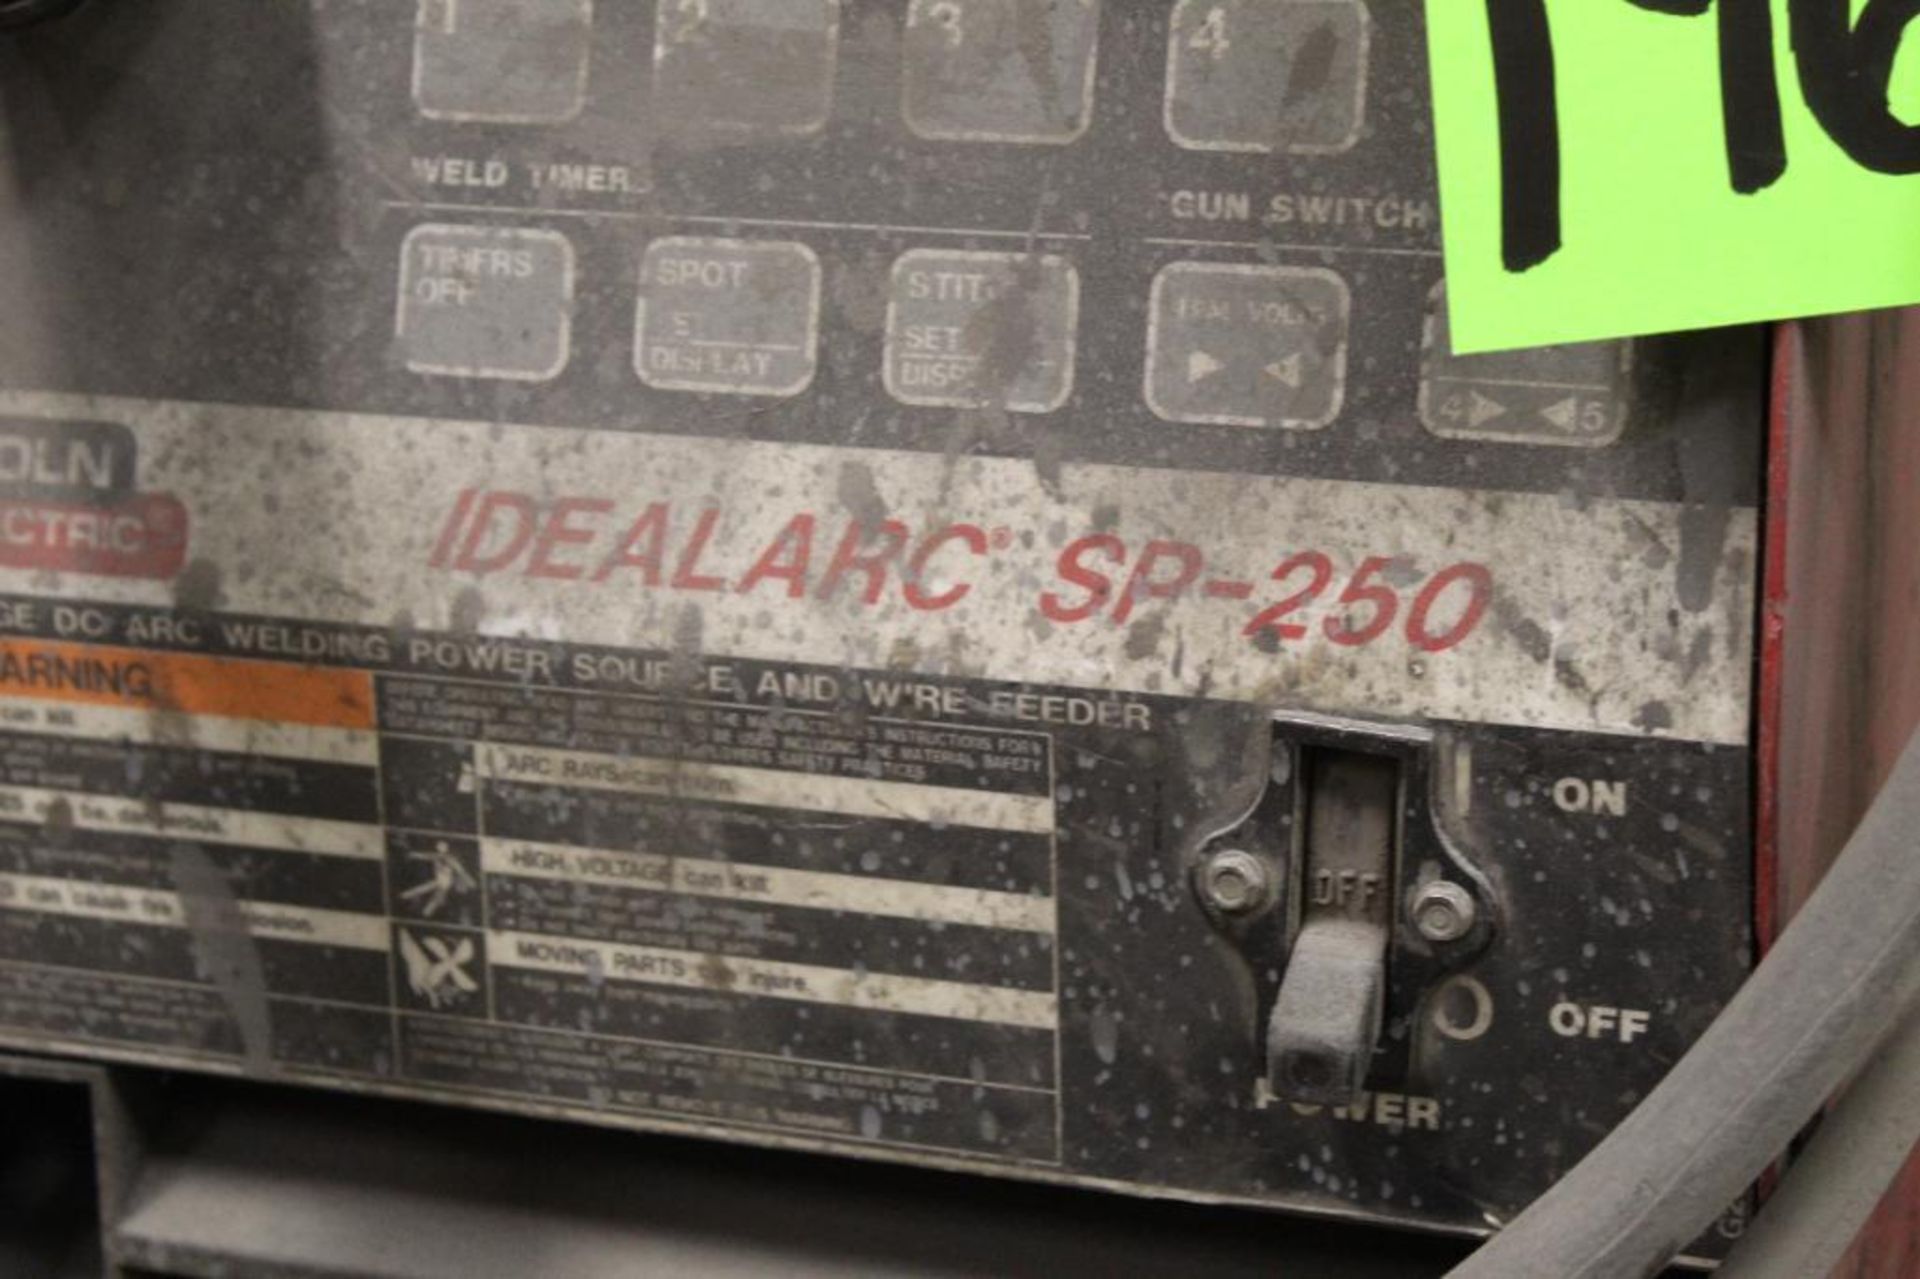 Lincoln Electric Ideal Arc SP-250 Welder - Image 5 of 6